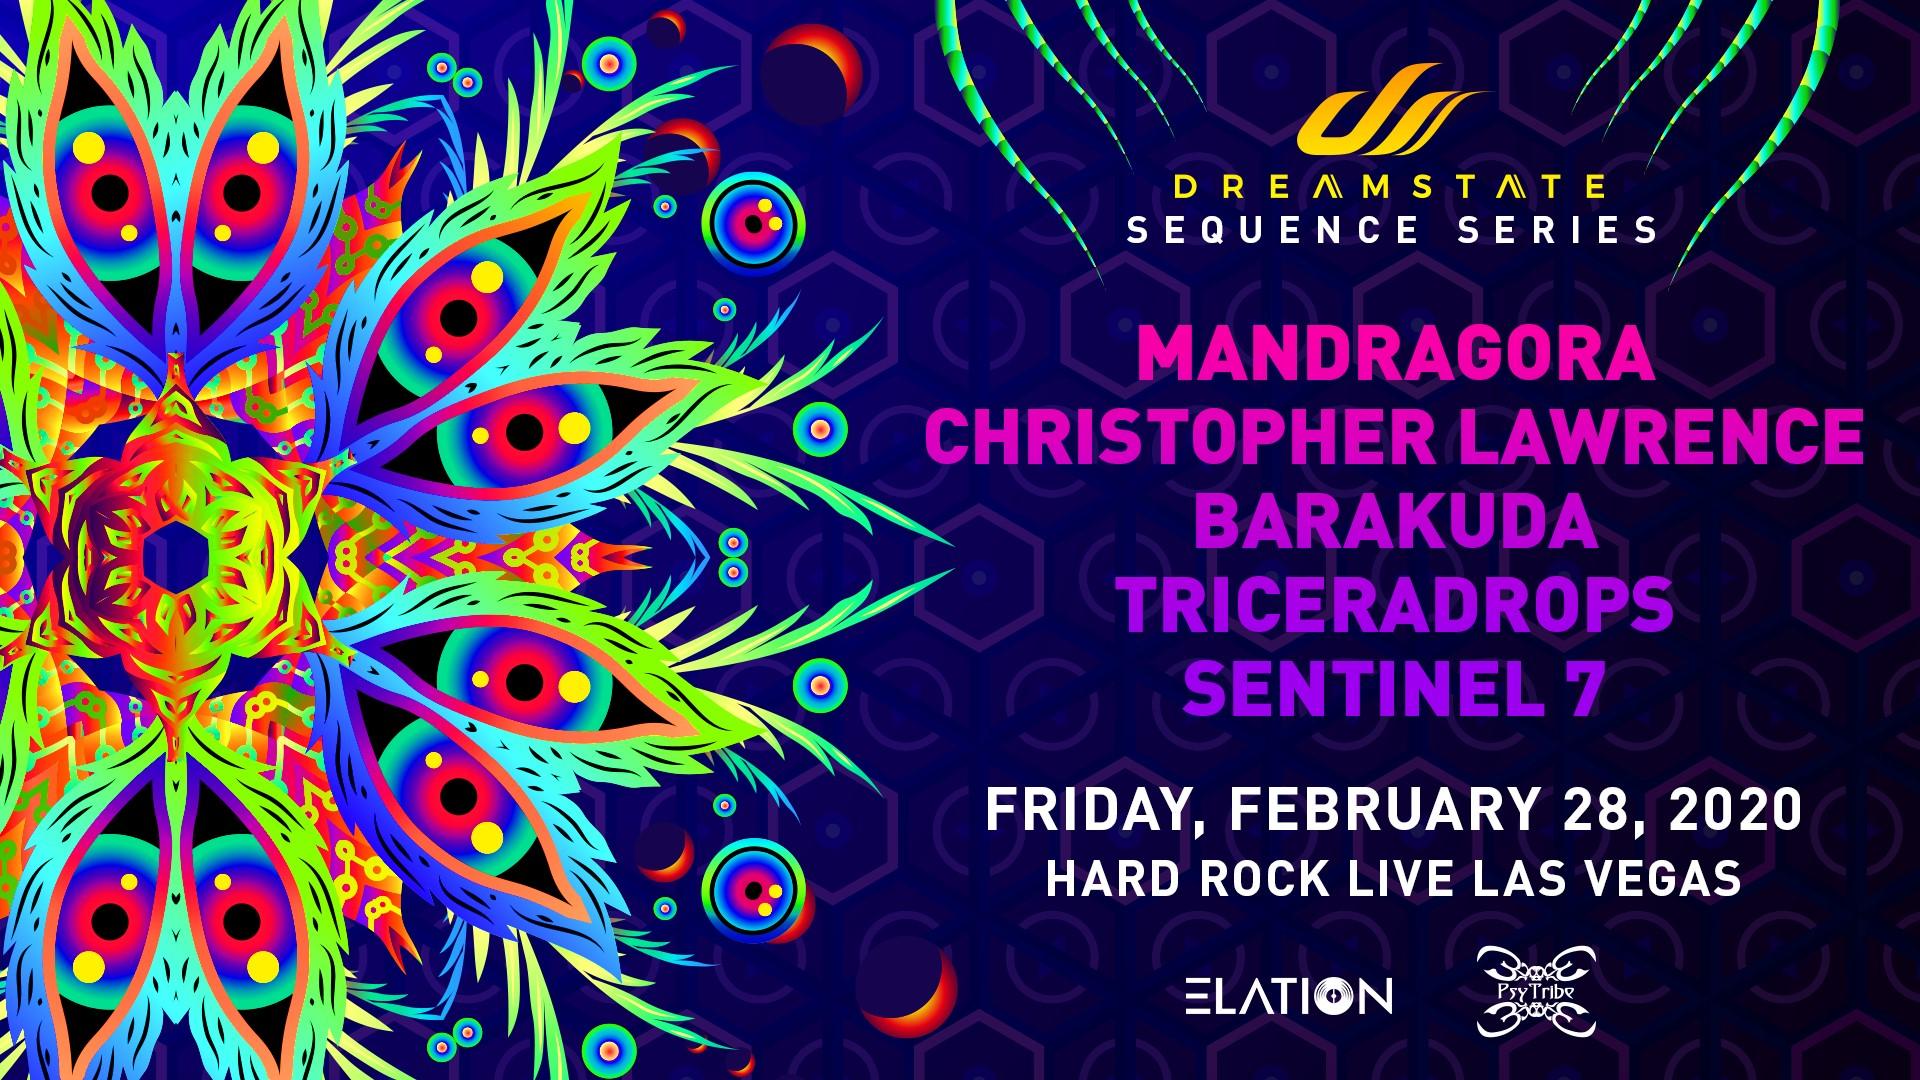 Dreamstate Sequence Series: Las Vegas ft Mandragora, Christopher Lawrence